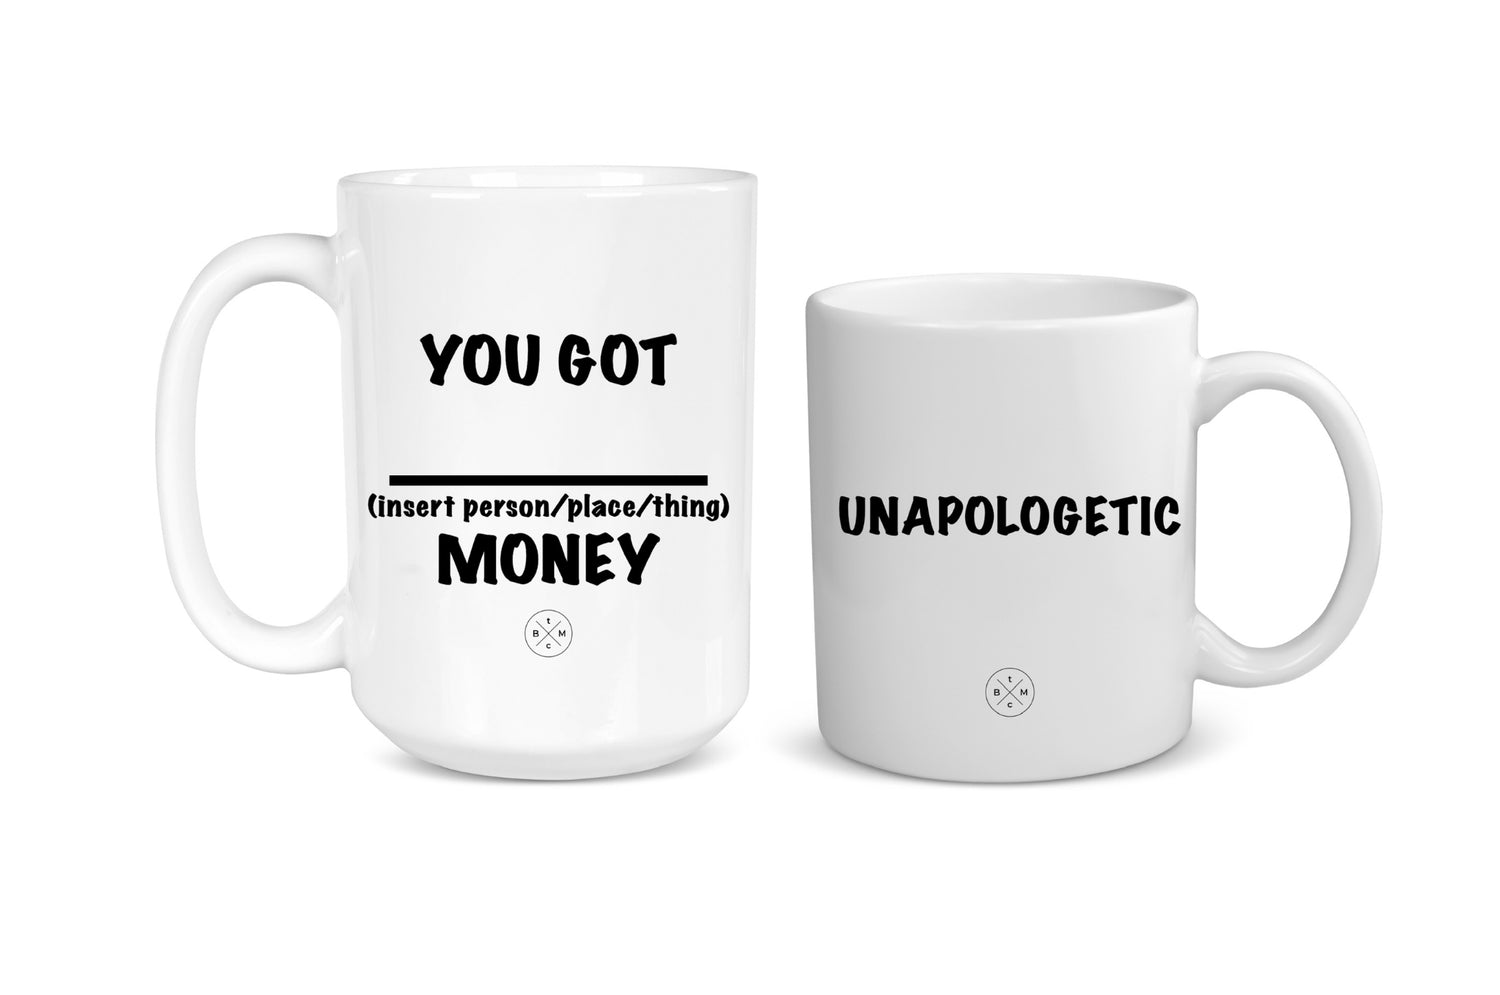 White mugs with black sayings unapologetic you got person place or thing money